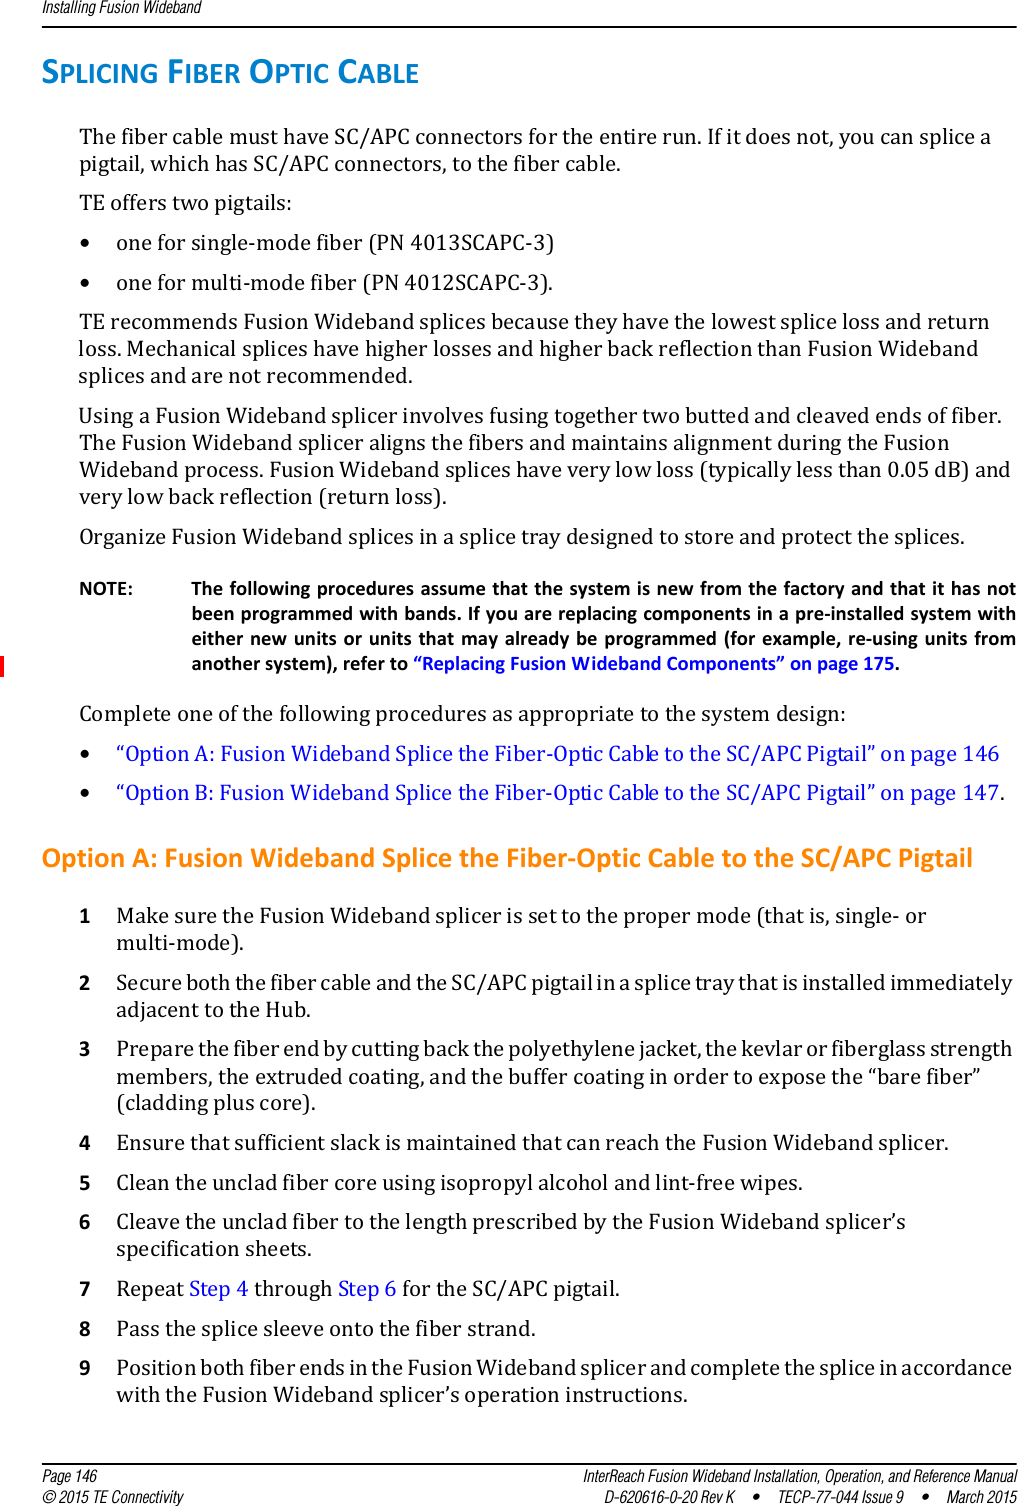 Installing Fusion Wideband  Page 146 InterReach Fusion Wideband Installation, Operation, and Reference Manual© 2015 TE Connectivity D-620616-0-20 Rev K  •  TECP-77-044 Issue 9  •  March 2015SPLICING FIBER OPTIC CABLEThe fiber cable must have SC/APC connectors for the entire run. If it does not, you can splice a pigtail, which has SC/APC connectors, to the fiber cable.TE offers two pigtails: •one for single-mode fiber (PN 4013SCAPC-3)•one for multi-mode fiber (PN 4012SCAPC-3).TE recommends Fusion Wideband splices because they have the lowest splice loss and return loss. Mechanical splices have higher losses and higher back reflection than Fusion Wideband splices and are not recommended.Using a Fusion Wideband splicer involves fusing together two butted and cleaved ends of fiber. The Fusion Wideband splicer aligns the fibers and maintains alignment during the Fusion Wideband process. Fusion Wideband splices have very low loss (typically less than 0.05 dB) and very low back reflection (return loss). Organize Fusion Wideband splices in a splice tray designed to store and protect the splices.NOTE: The following procedures assume that the system is new from the factory and that it has not been programmed with bands. If you are replacing components in a pre-installed system with either new units or units that may already be programmed (for example, re-using units from another system), refer to “Replacing Fusion Wideband Components” on page 175.Complete one of the following procedures as appropriate to the system design:•“Option A: Fusion Wideband Splice the Fiber-Optic Cable to the SC/APC Pigtail” on page 146•“Option B: Fusion Wideband Splice the Fiber-Optic Cable to the SC/APC Pigtail” on page 147.Option A: Fusion Wideband Splice the Fiber-Optic Cable to the SC/APC Pigtail1Make sure the Fusion Wideband splicer is set to the proper mode (that is, single- or multi-mode).2Secure both the fiber cable and the SC/APC pigtail in a splice tray that is installed immediately adjacent to the Hub.3Prepare the fiber end by cutting back the polyethylene jacket, the kevlar or fiberglass strength members, the extruded coating, and the buffer coating in order to expose the “bare fiber” (cladding plus core).4Ensure that sufficient slack is maintained that can reach the Fusion Wideband splicer.5Clean the unclad fiber core using isopropyl alcohol and lint-free wipes.6Cleave the unclad fiber to the length prescribed by the Fusion Wideband splicer’s specification sheets.7Repeat Step 4 through Step 6 for the SC/APC pigtail.8Pass the splice sleeve onto the fiber strand.9Position both fiber ends in the Fusion Wideband splicer and complete the splice in accordance with the Fusion Wideband splicer’s operation instructions.